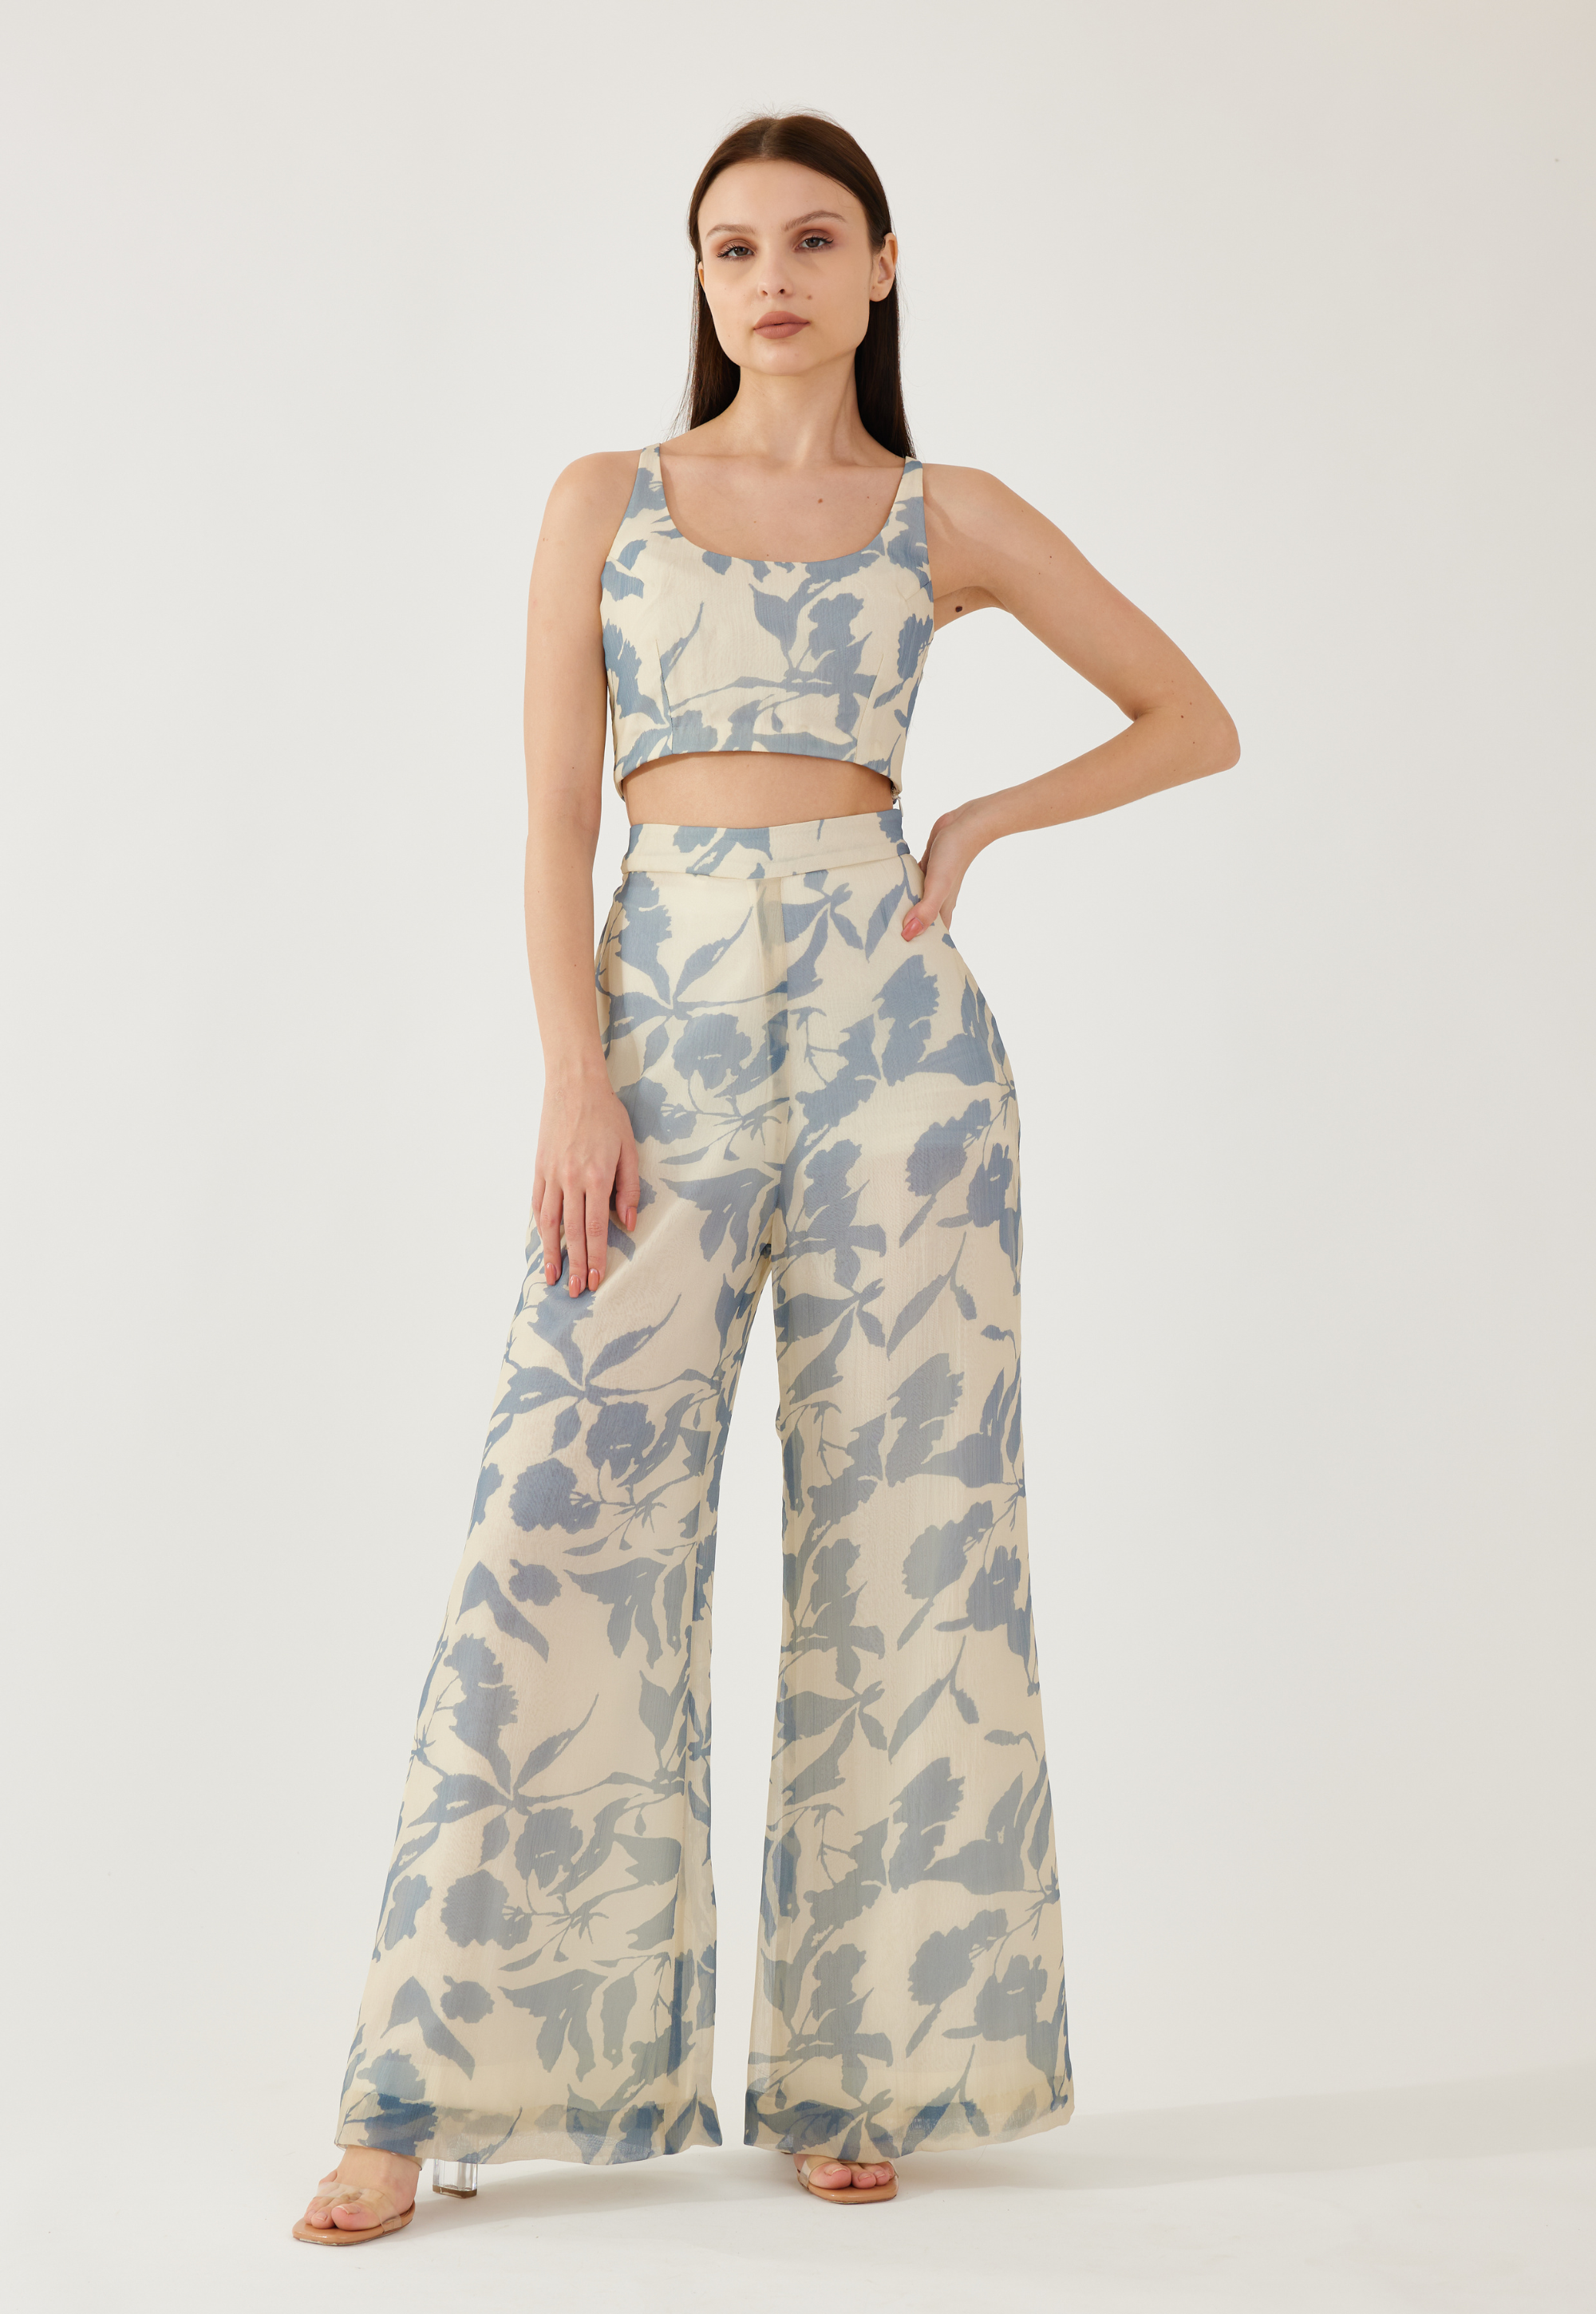 Cream and blue floral pants